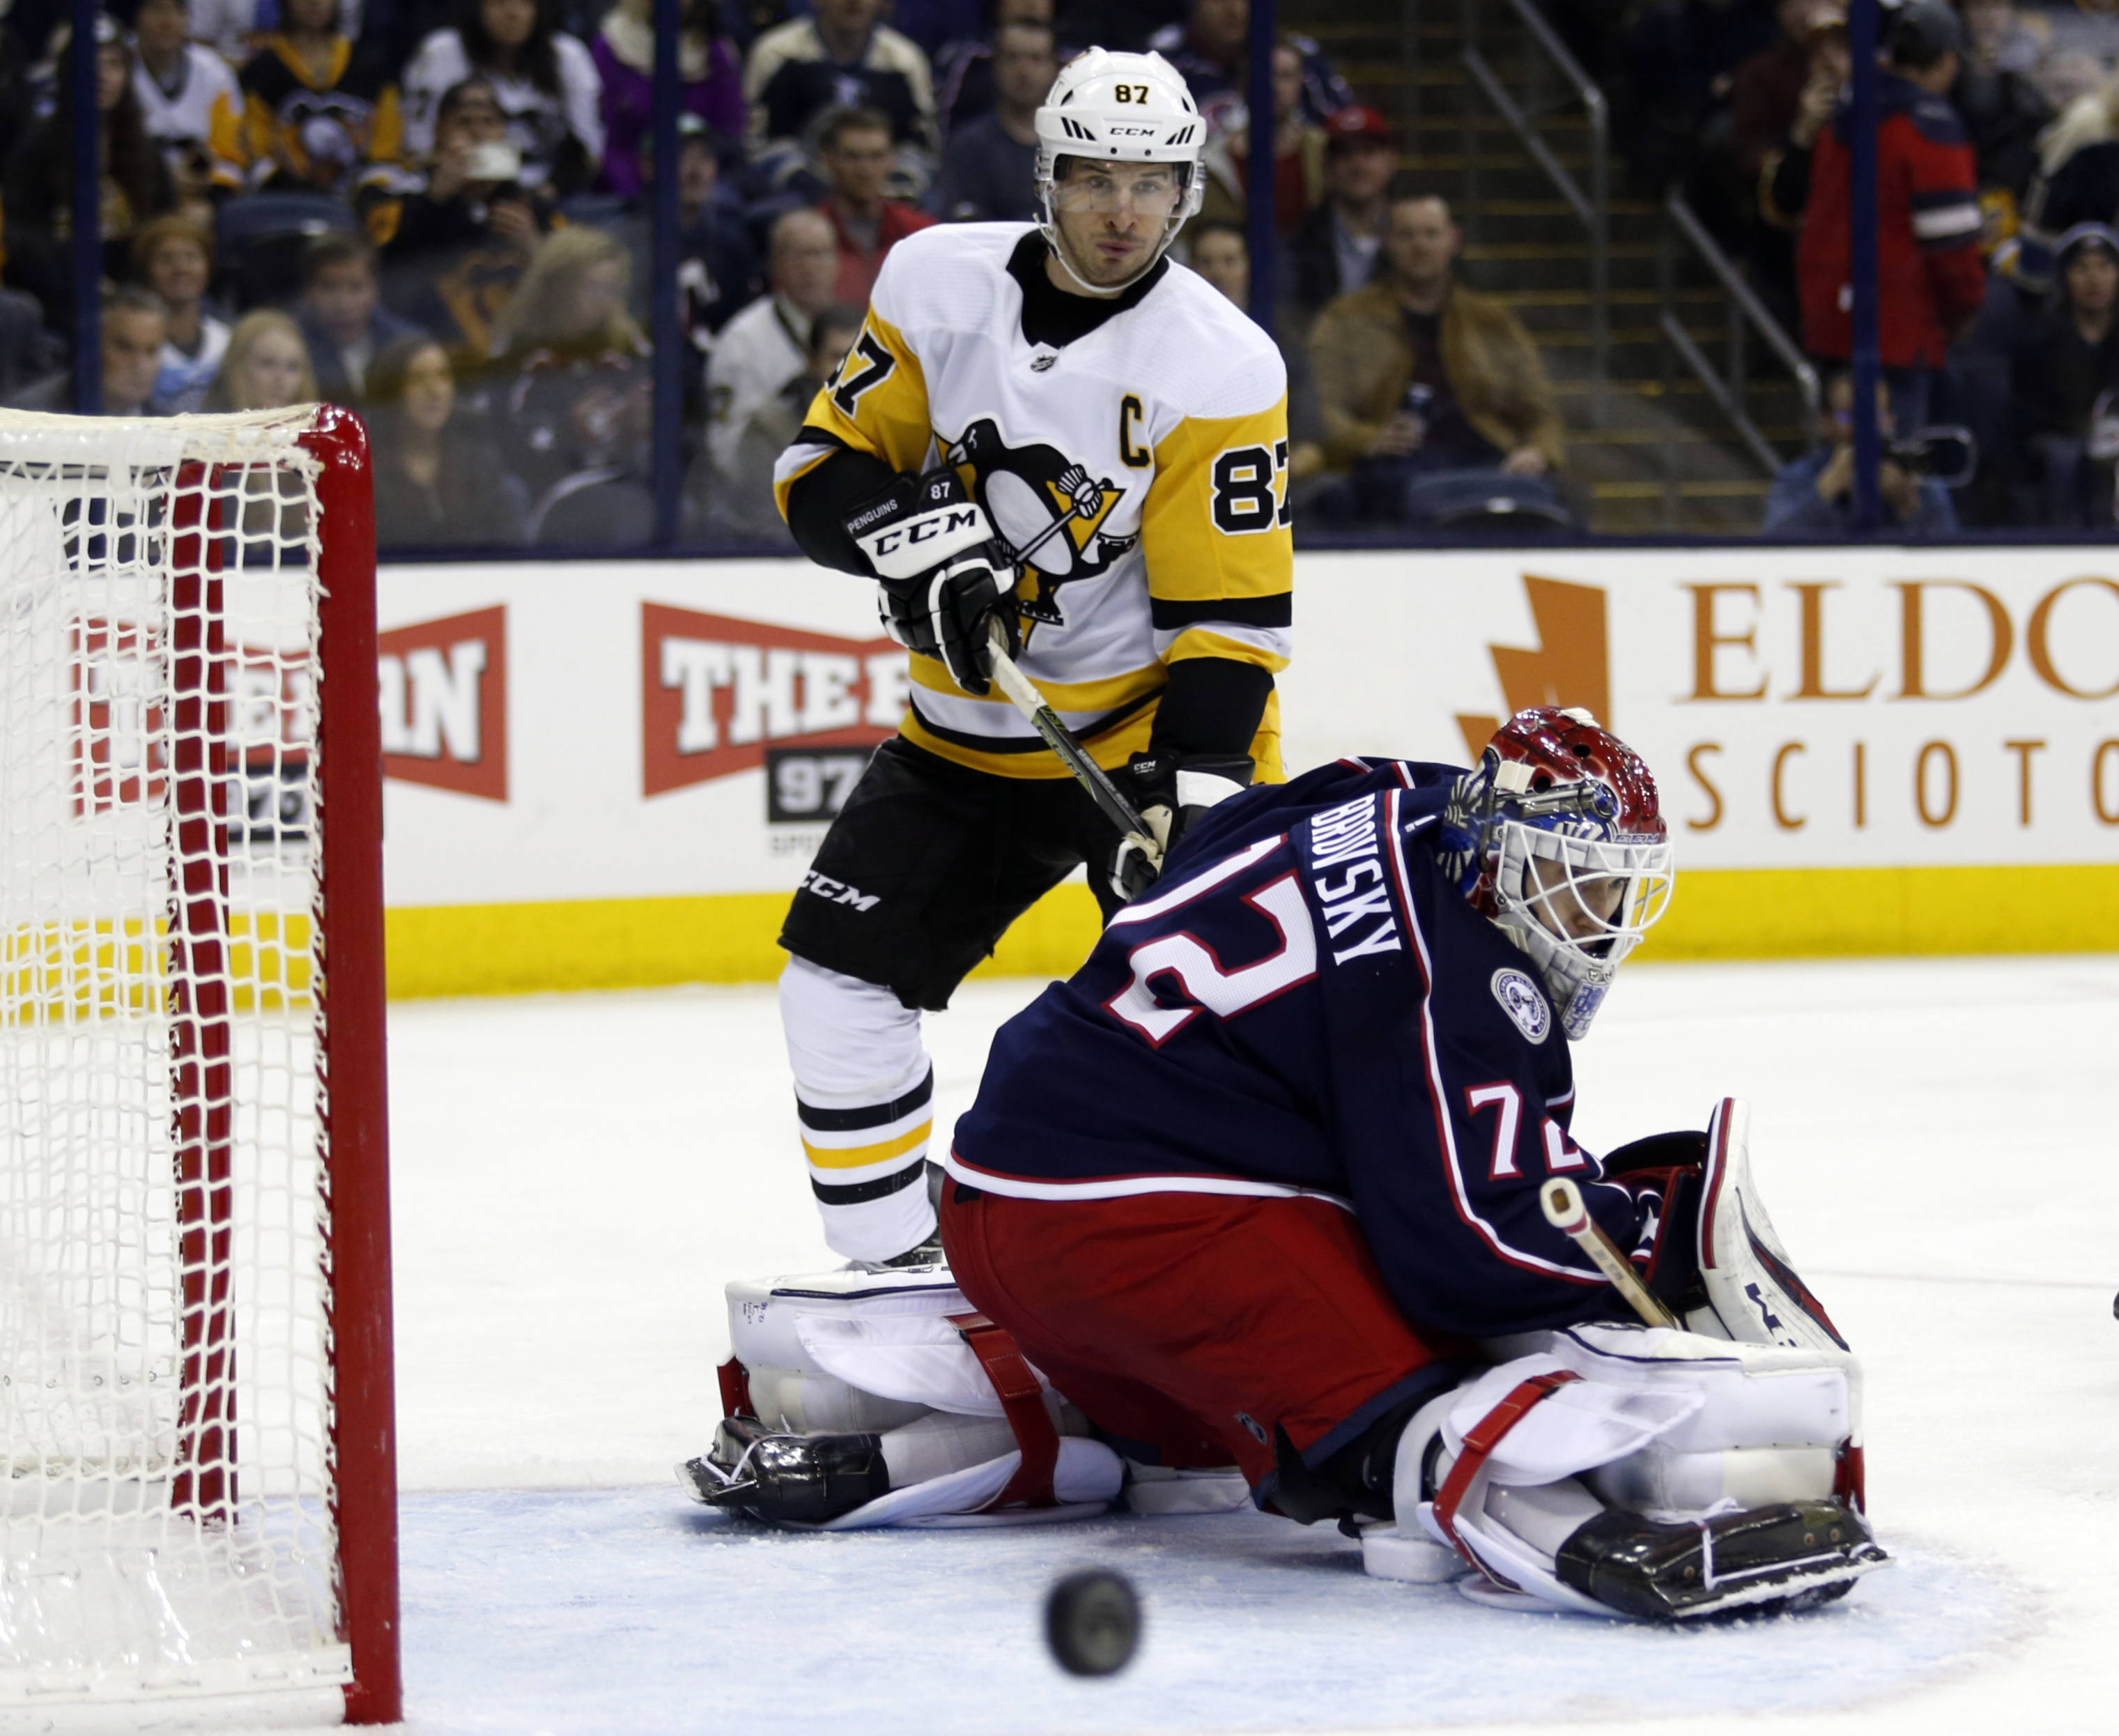 Atkinson scores twice to lift Blue Jackets over Penguins